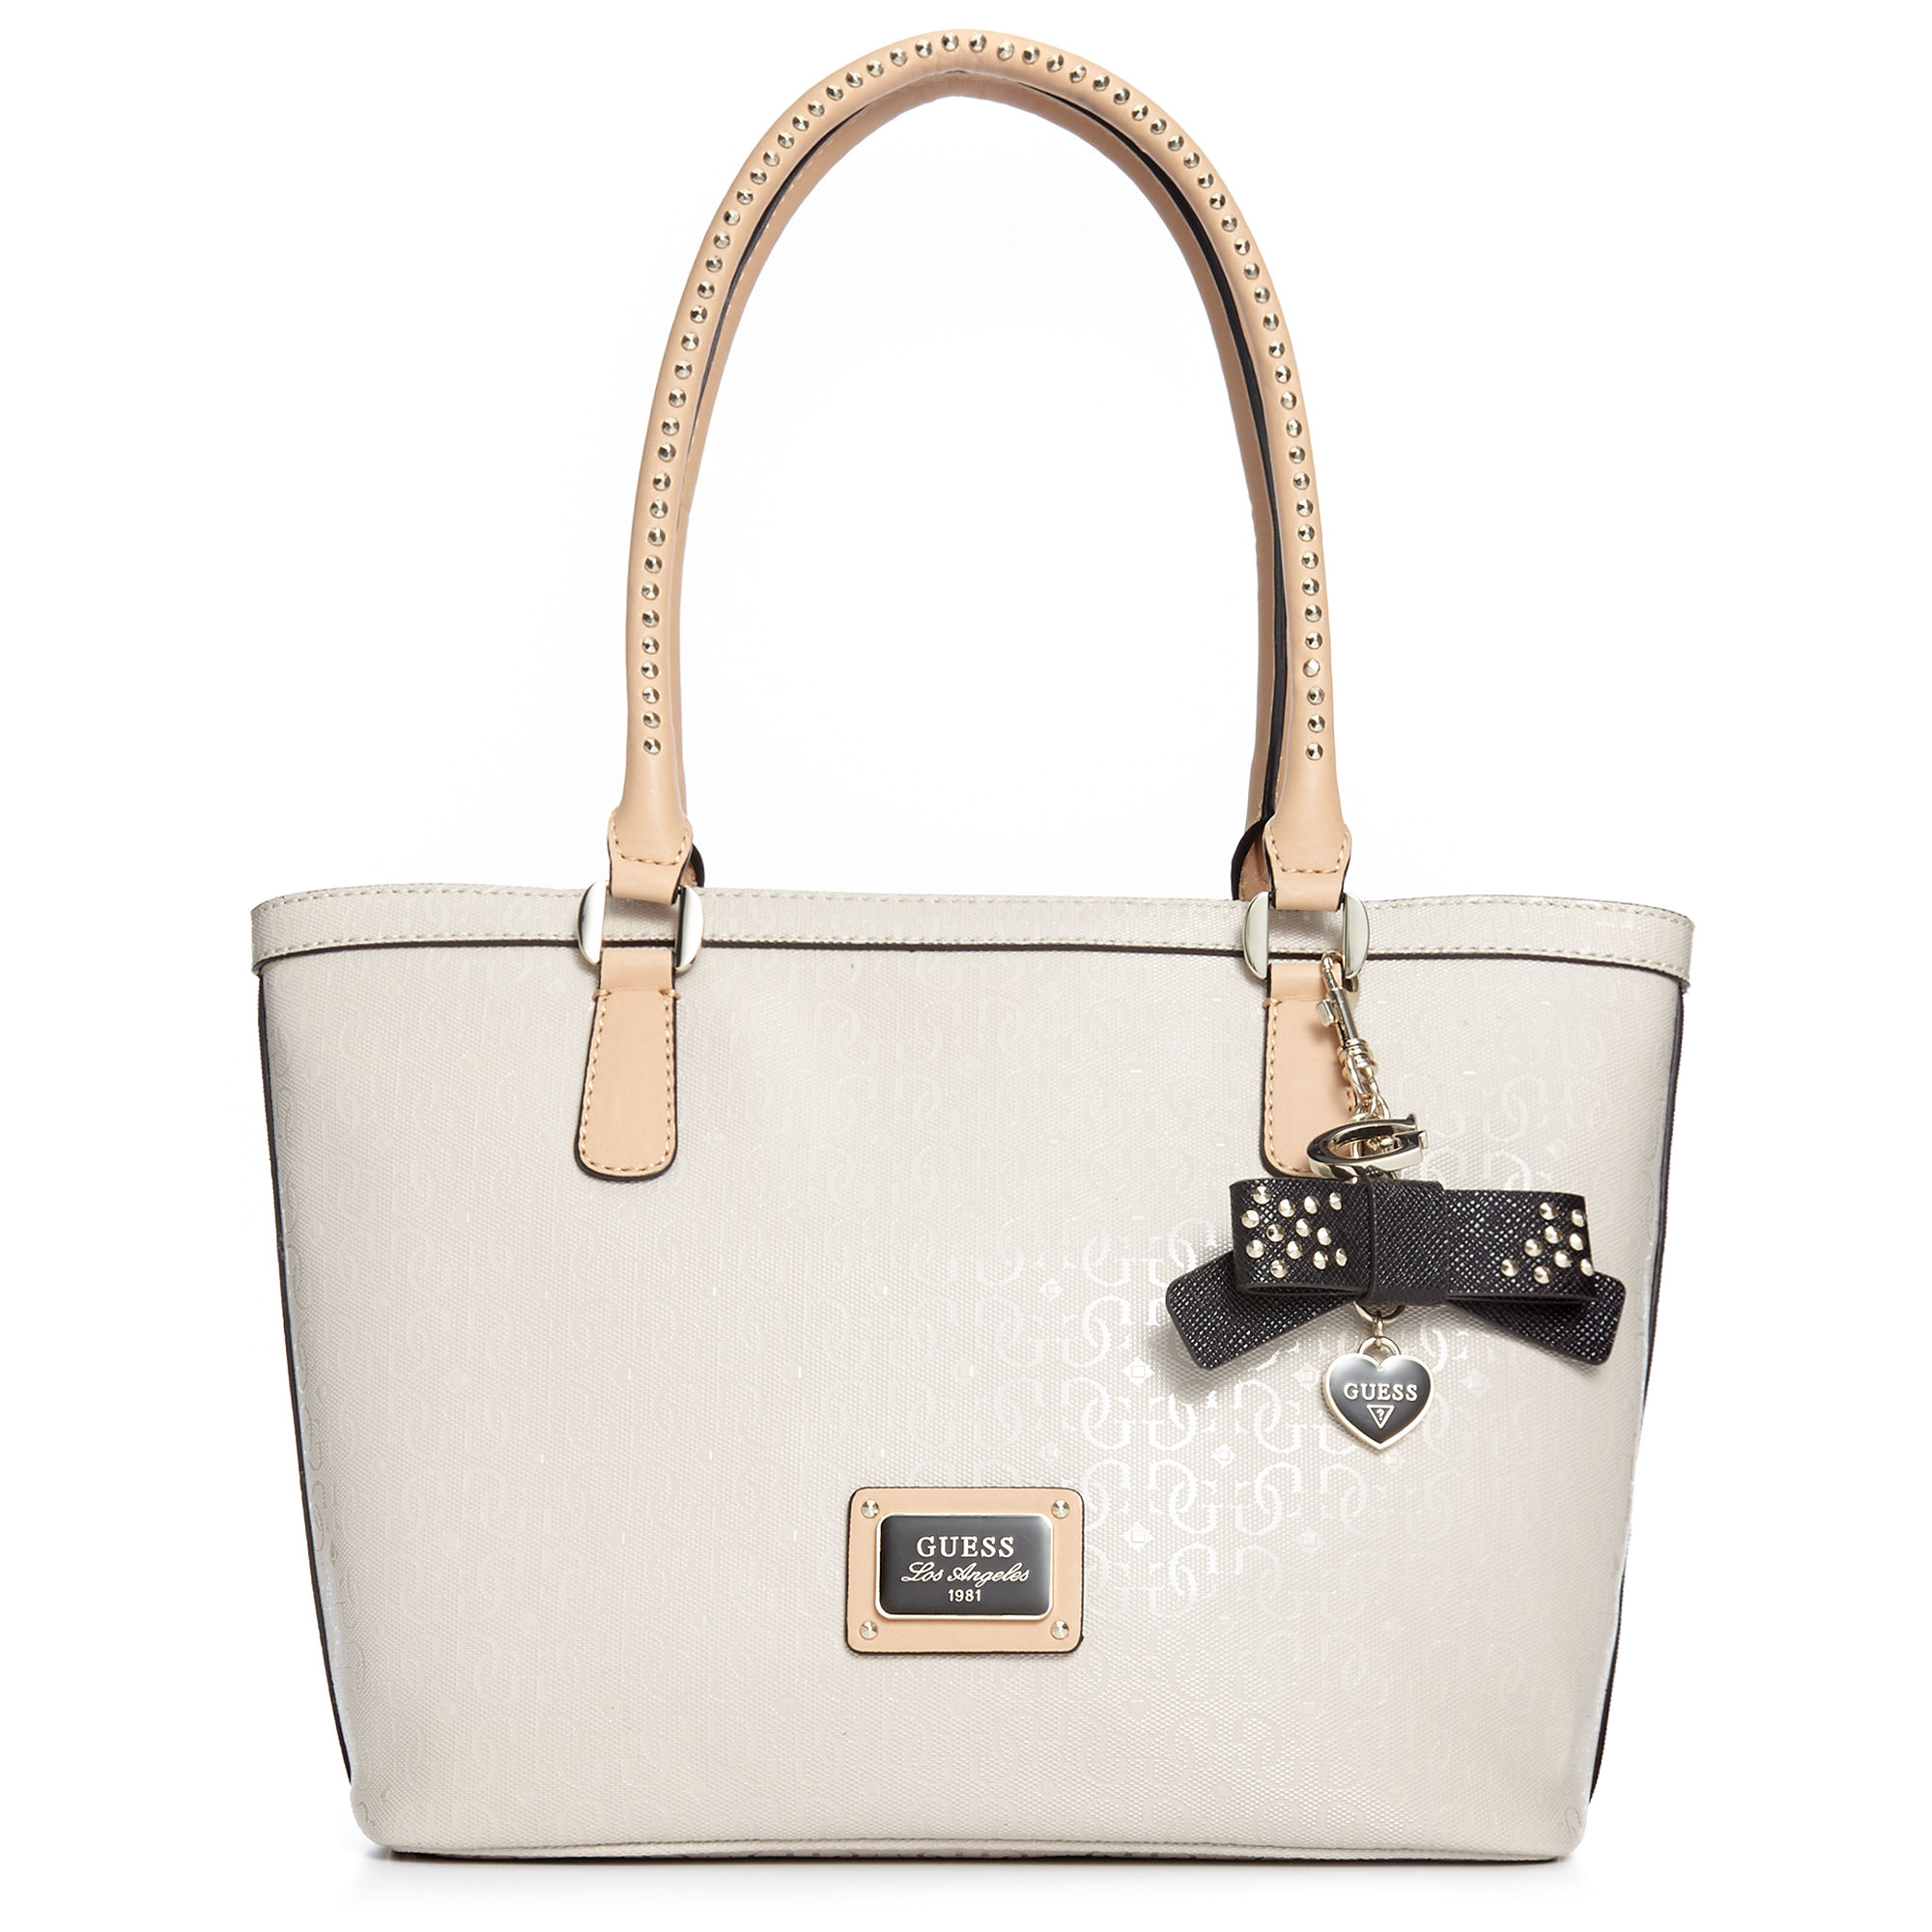 Lyst - Guess Guess Handbag Specks Small Classic Tote in White